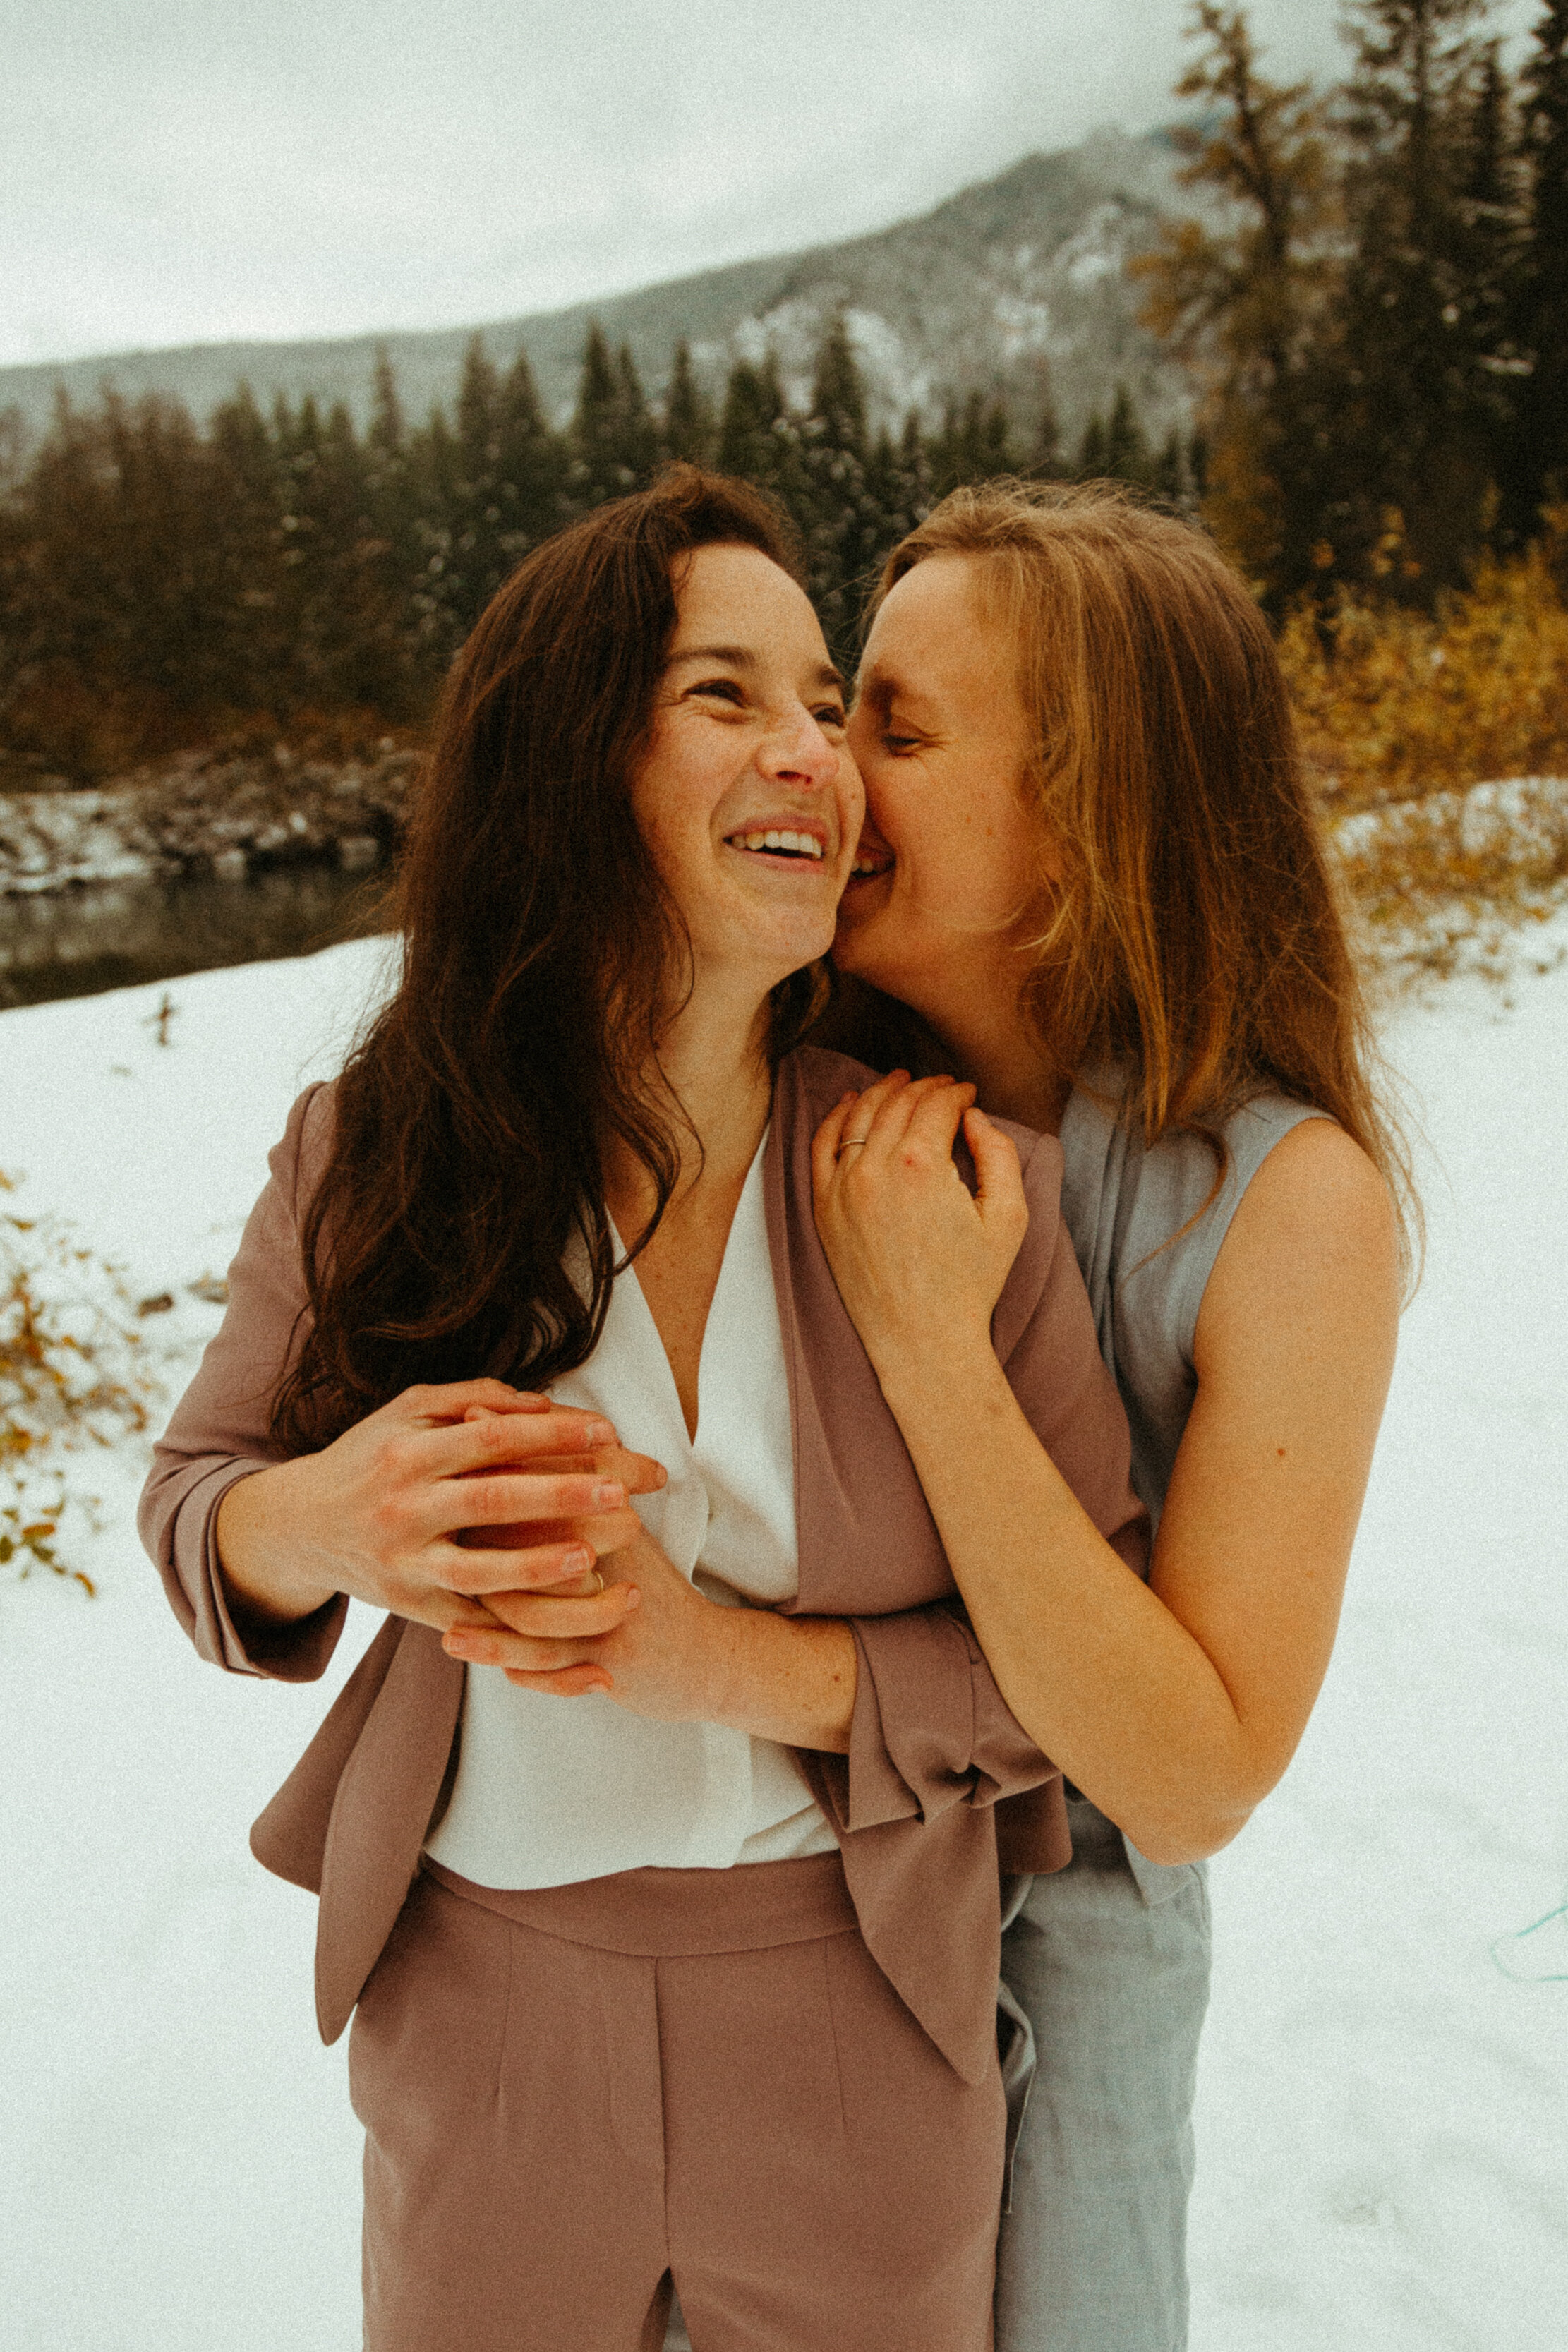 queer-gay-lesbian-trans-affirming-lgbtq-adventure-elopement-intimate-wedding-photographer-pnw-pacific-northwest-pnw-mountain-stream-forest-cowgay-tacoma-seattle-washington-portland-oregon-halle-roland-photography-non-binary-analog-film-artist-165-200.jpg